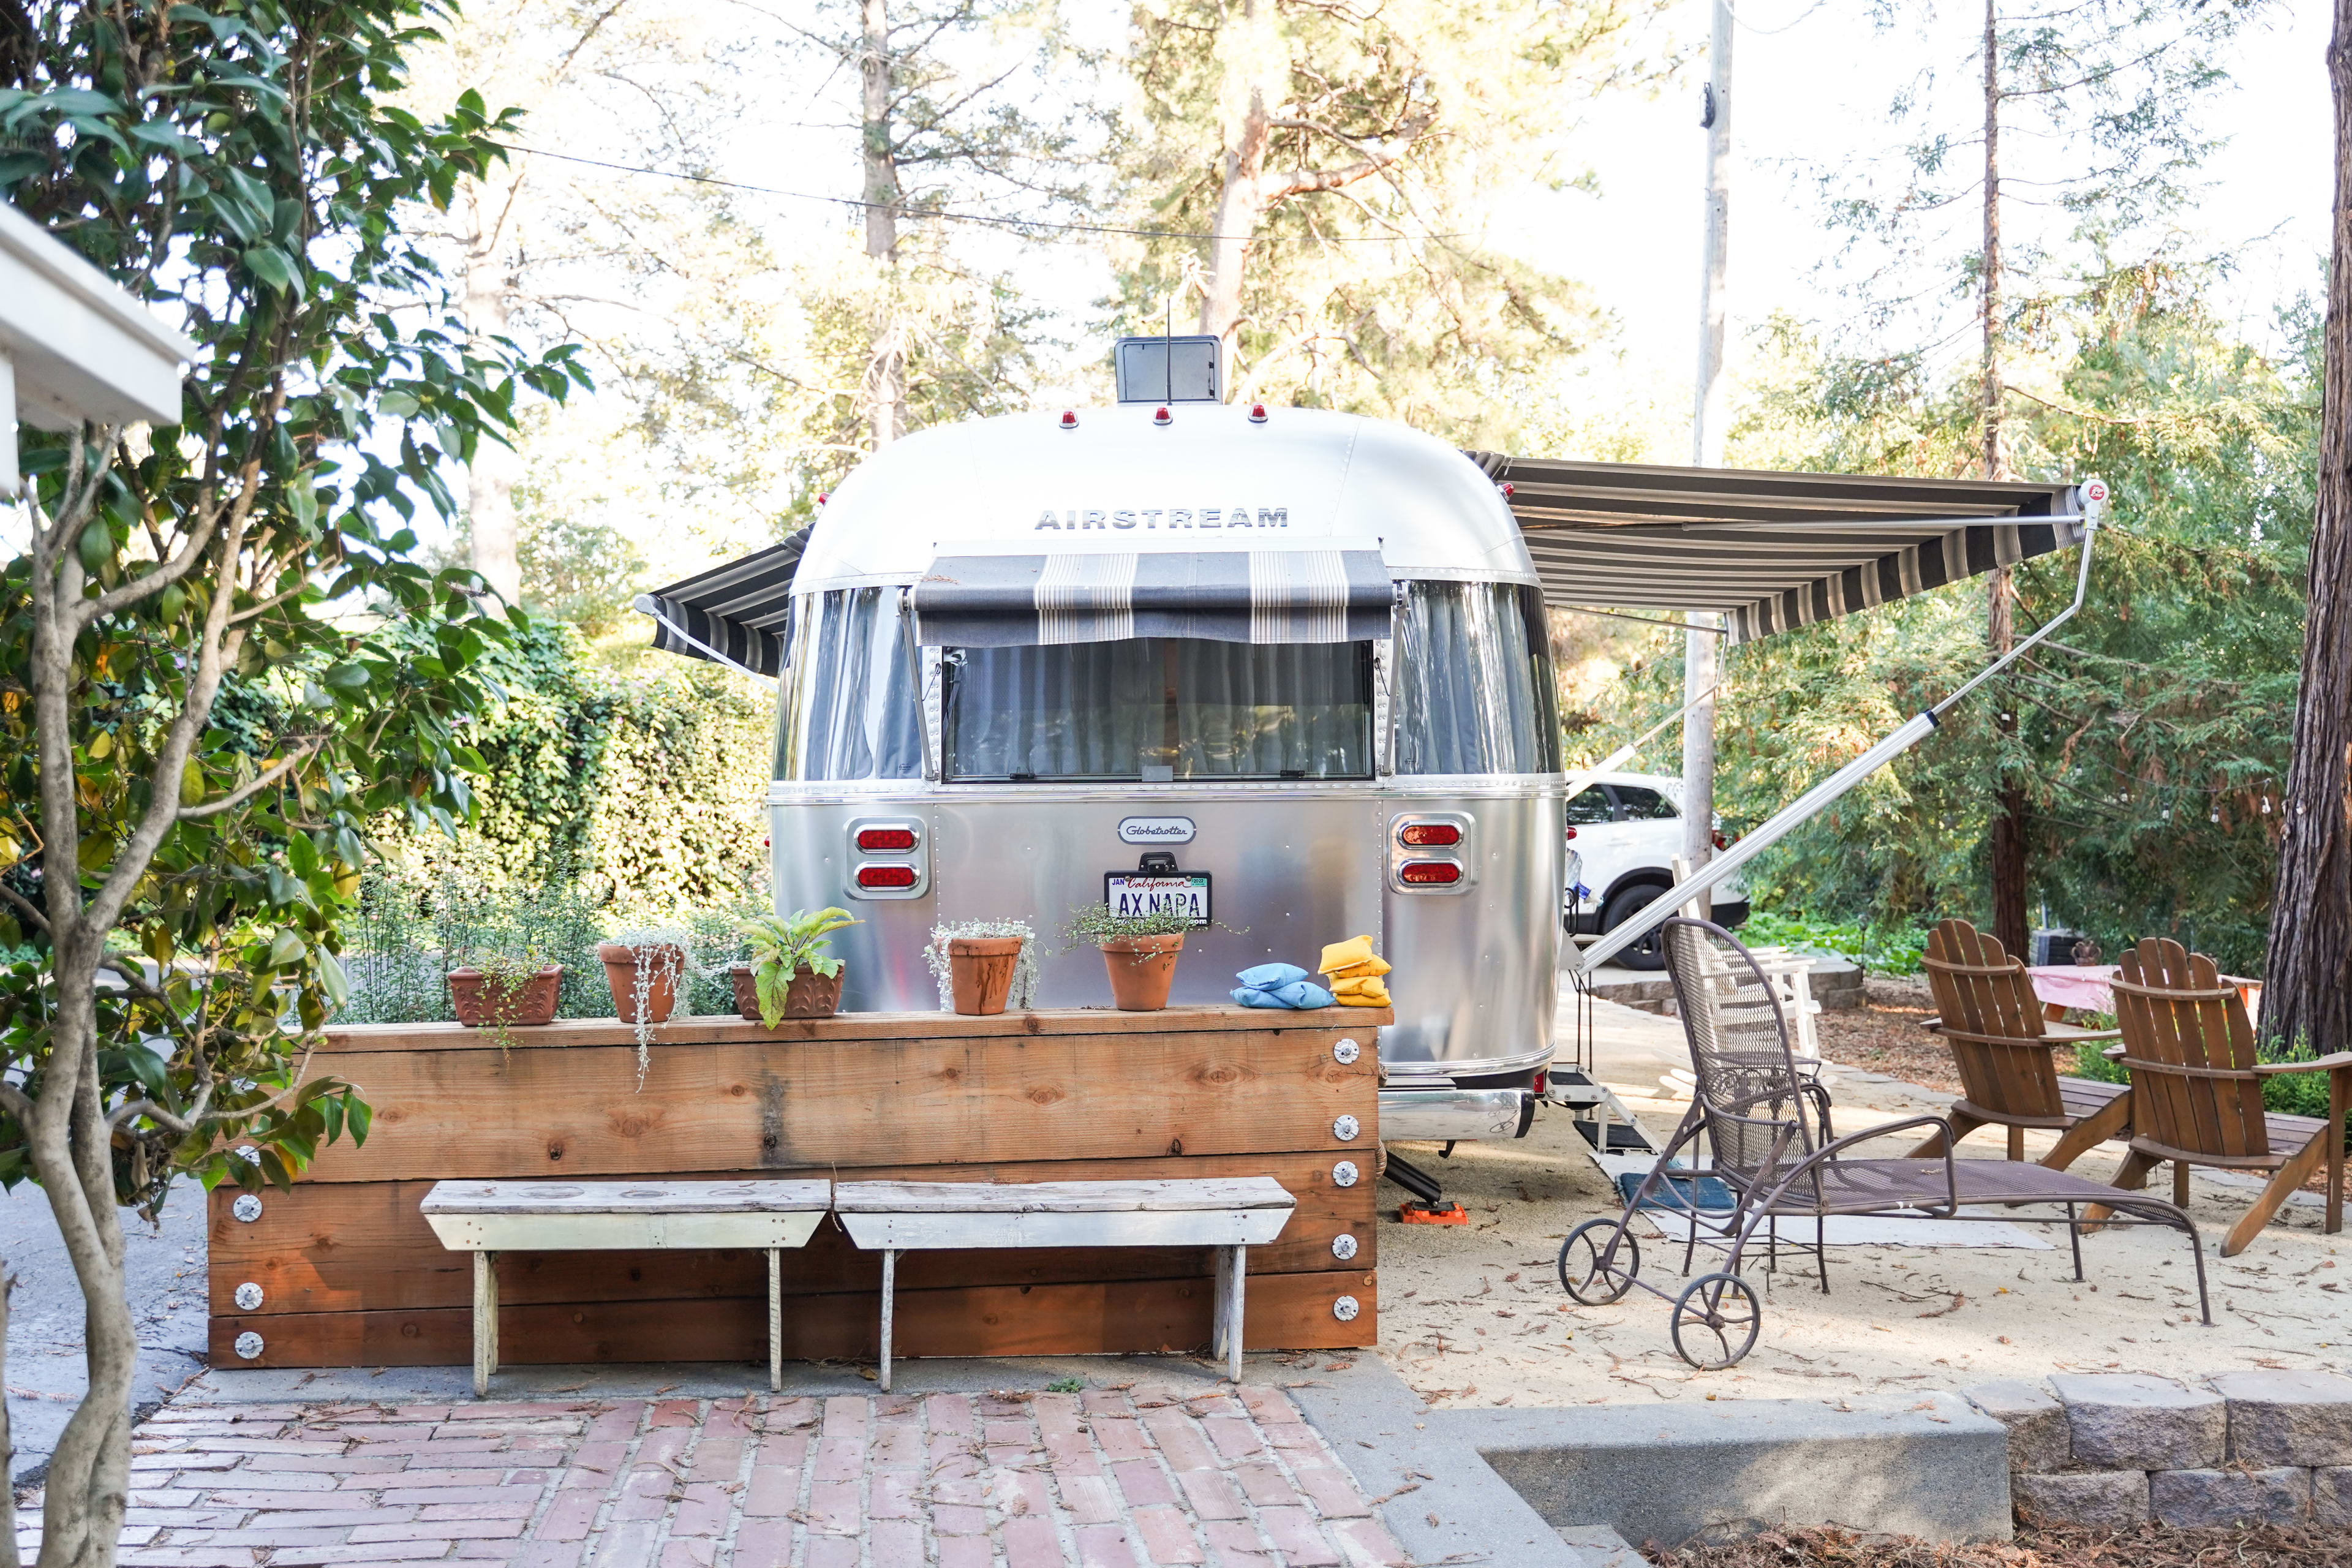 We loved how many seating options there were available outside the Airstream on the property.